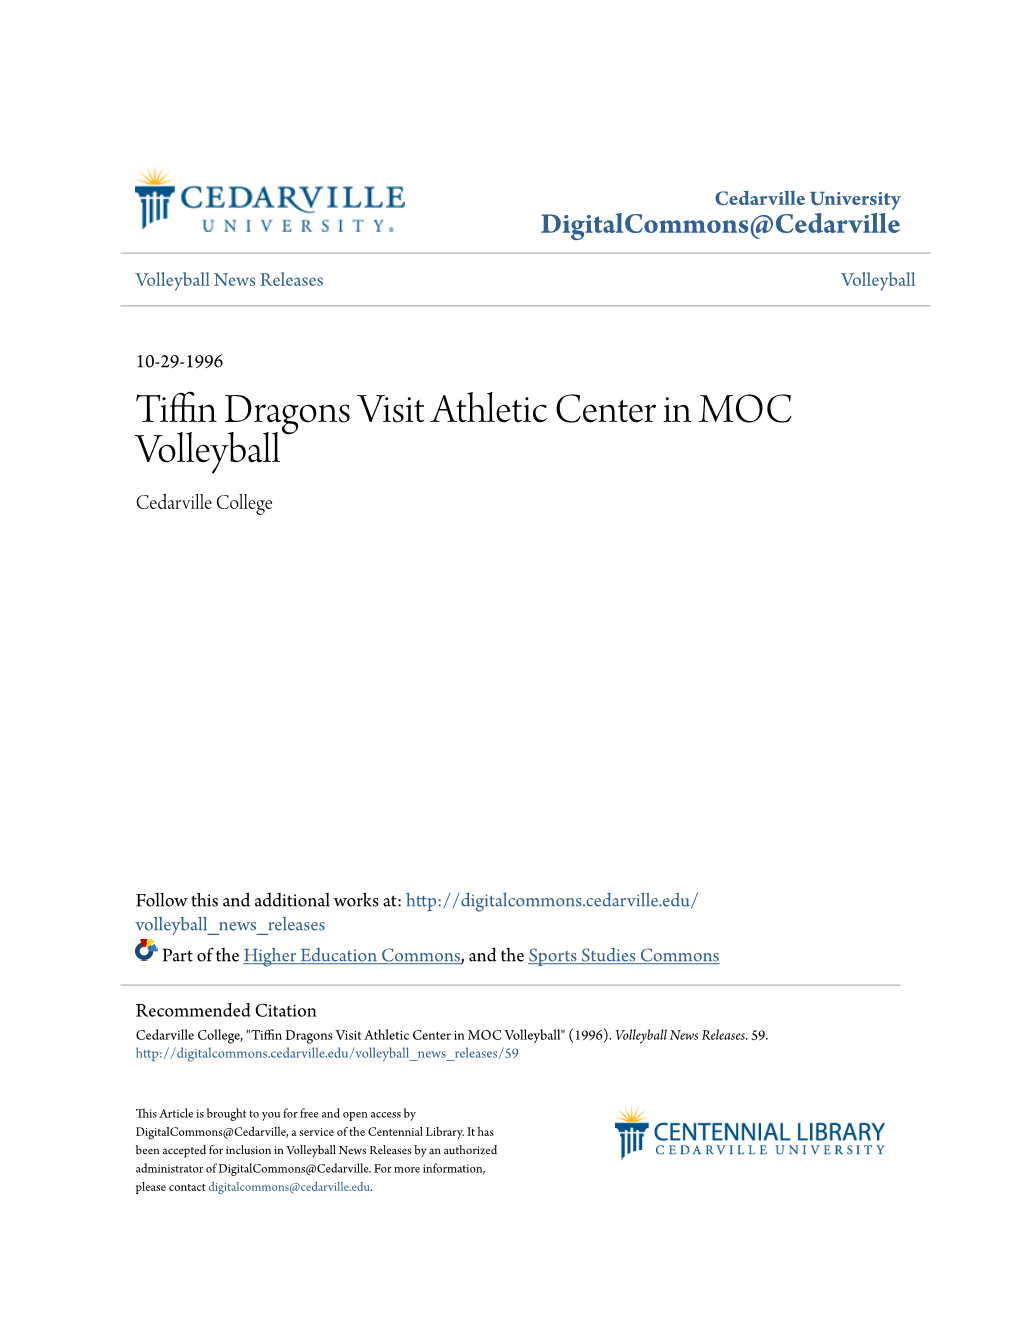 Tiffin Dragons Visit Athletic Center in MOC Volleyball Cedarville College